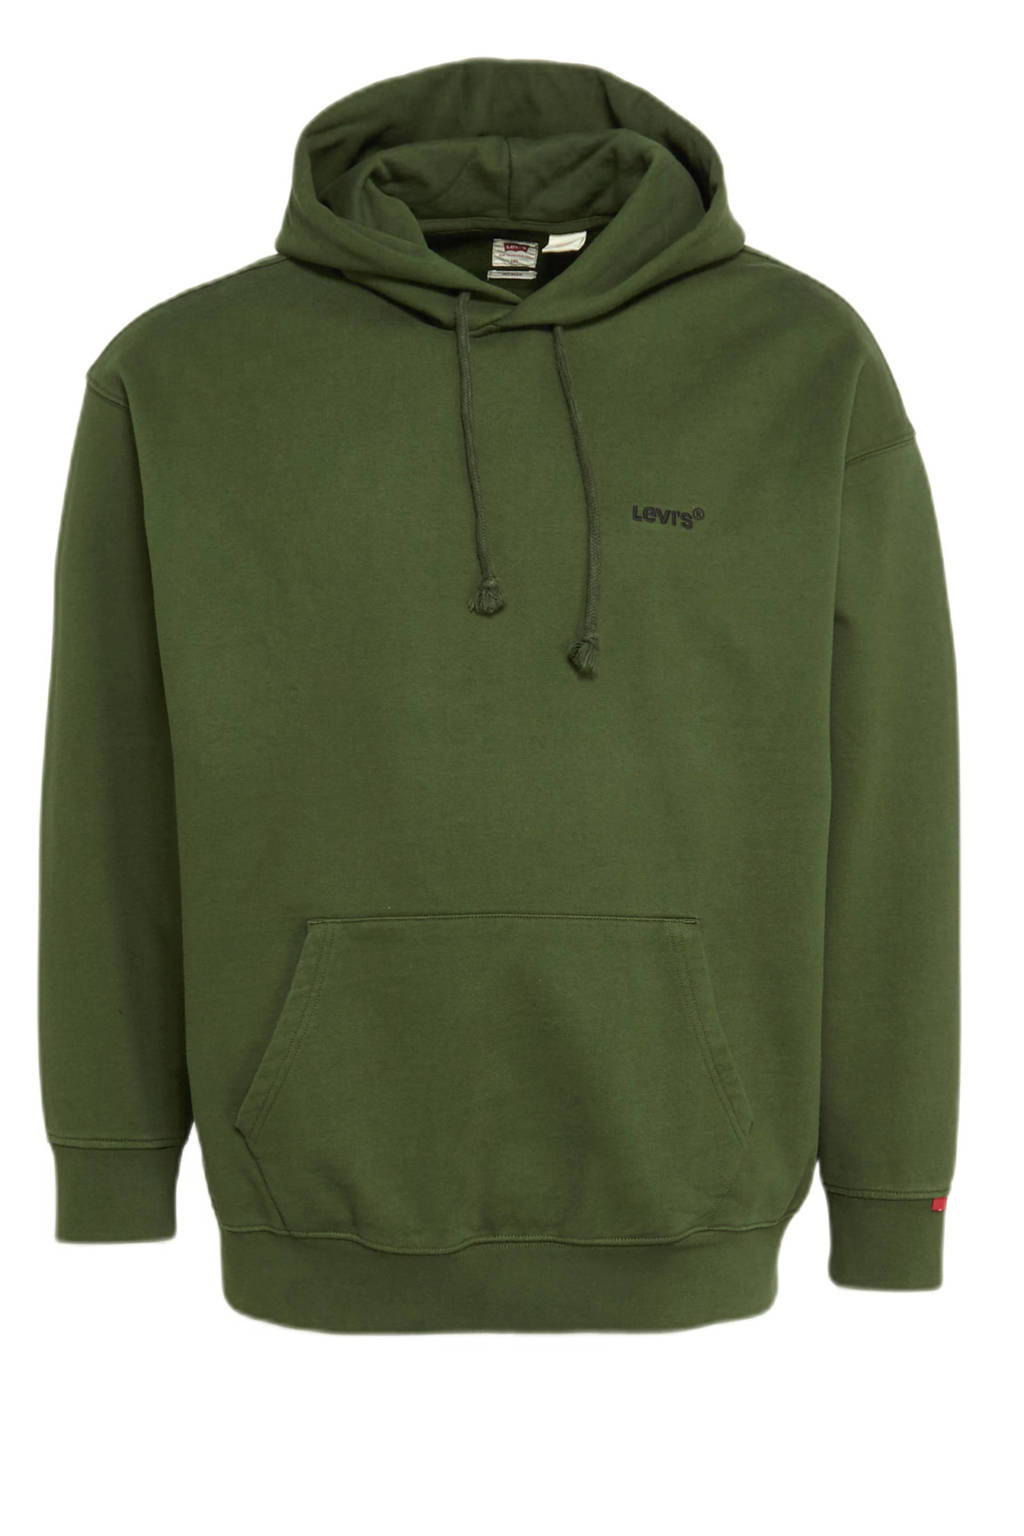 Levi's Big and Tall hoodie Plus Size mossy green